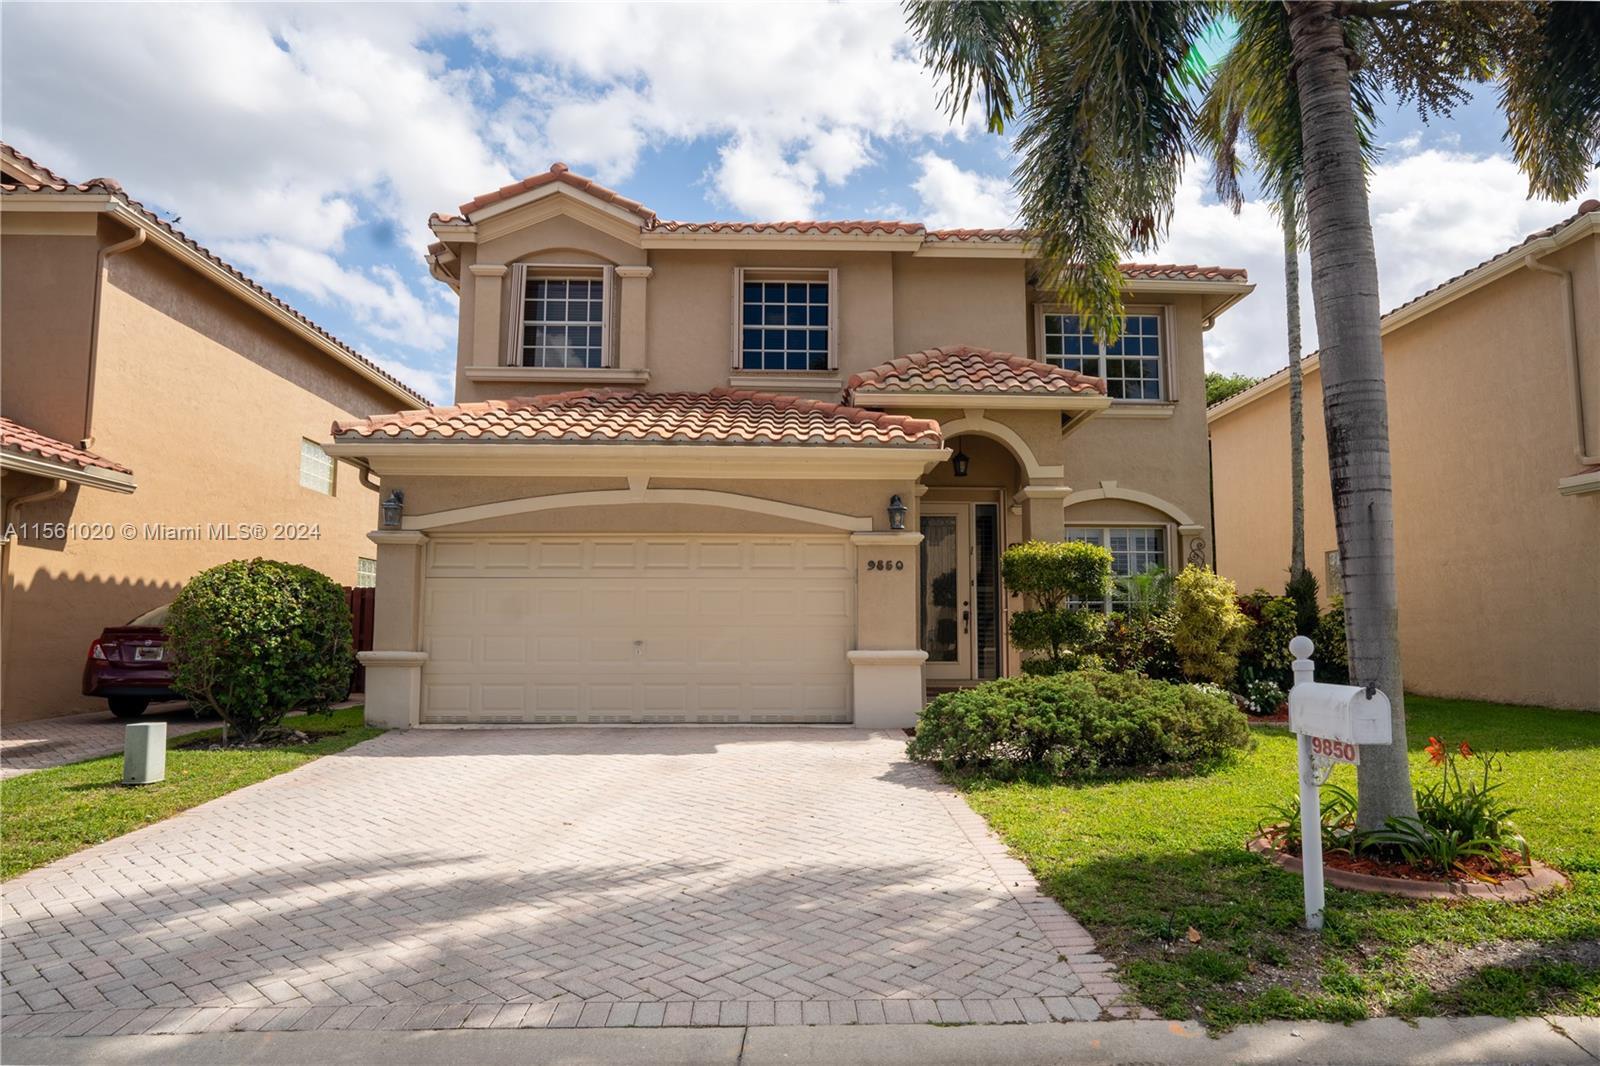 Photo of 9850 NW 20th Ct in Pembroke Pines, FL